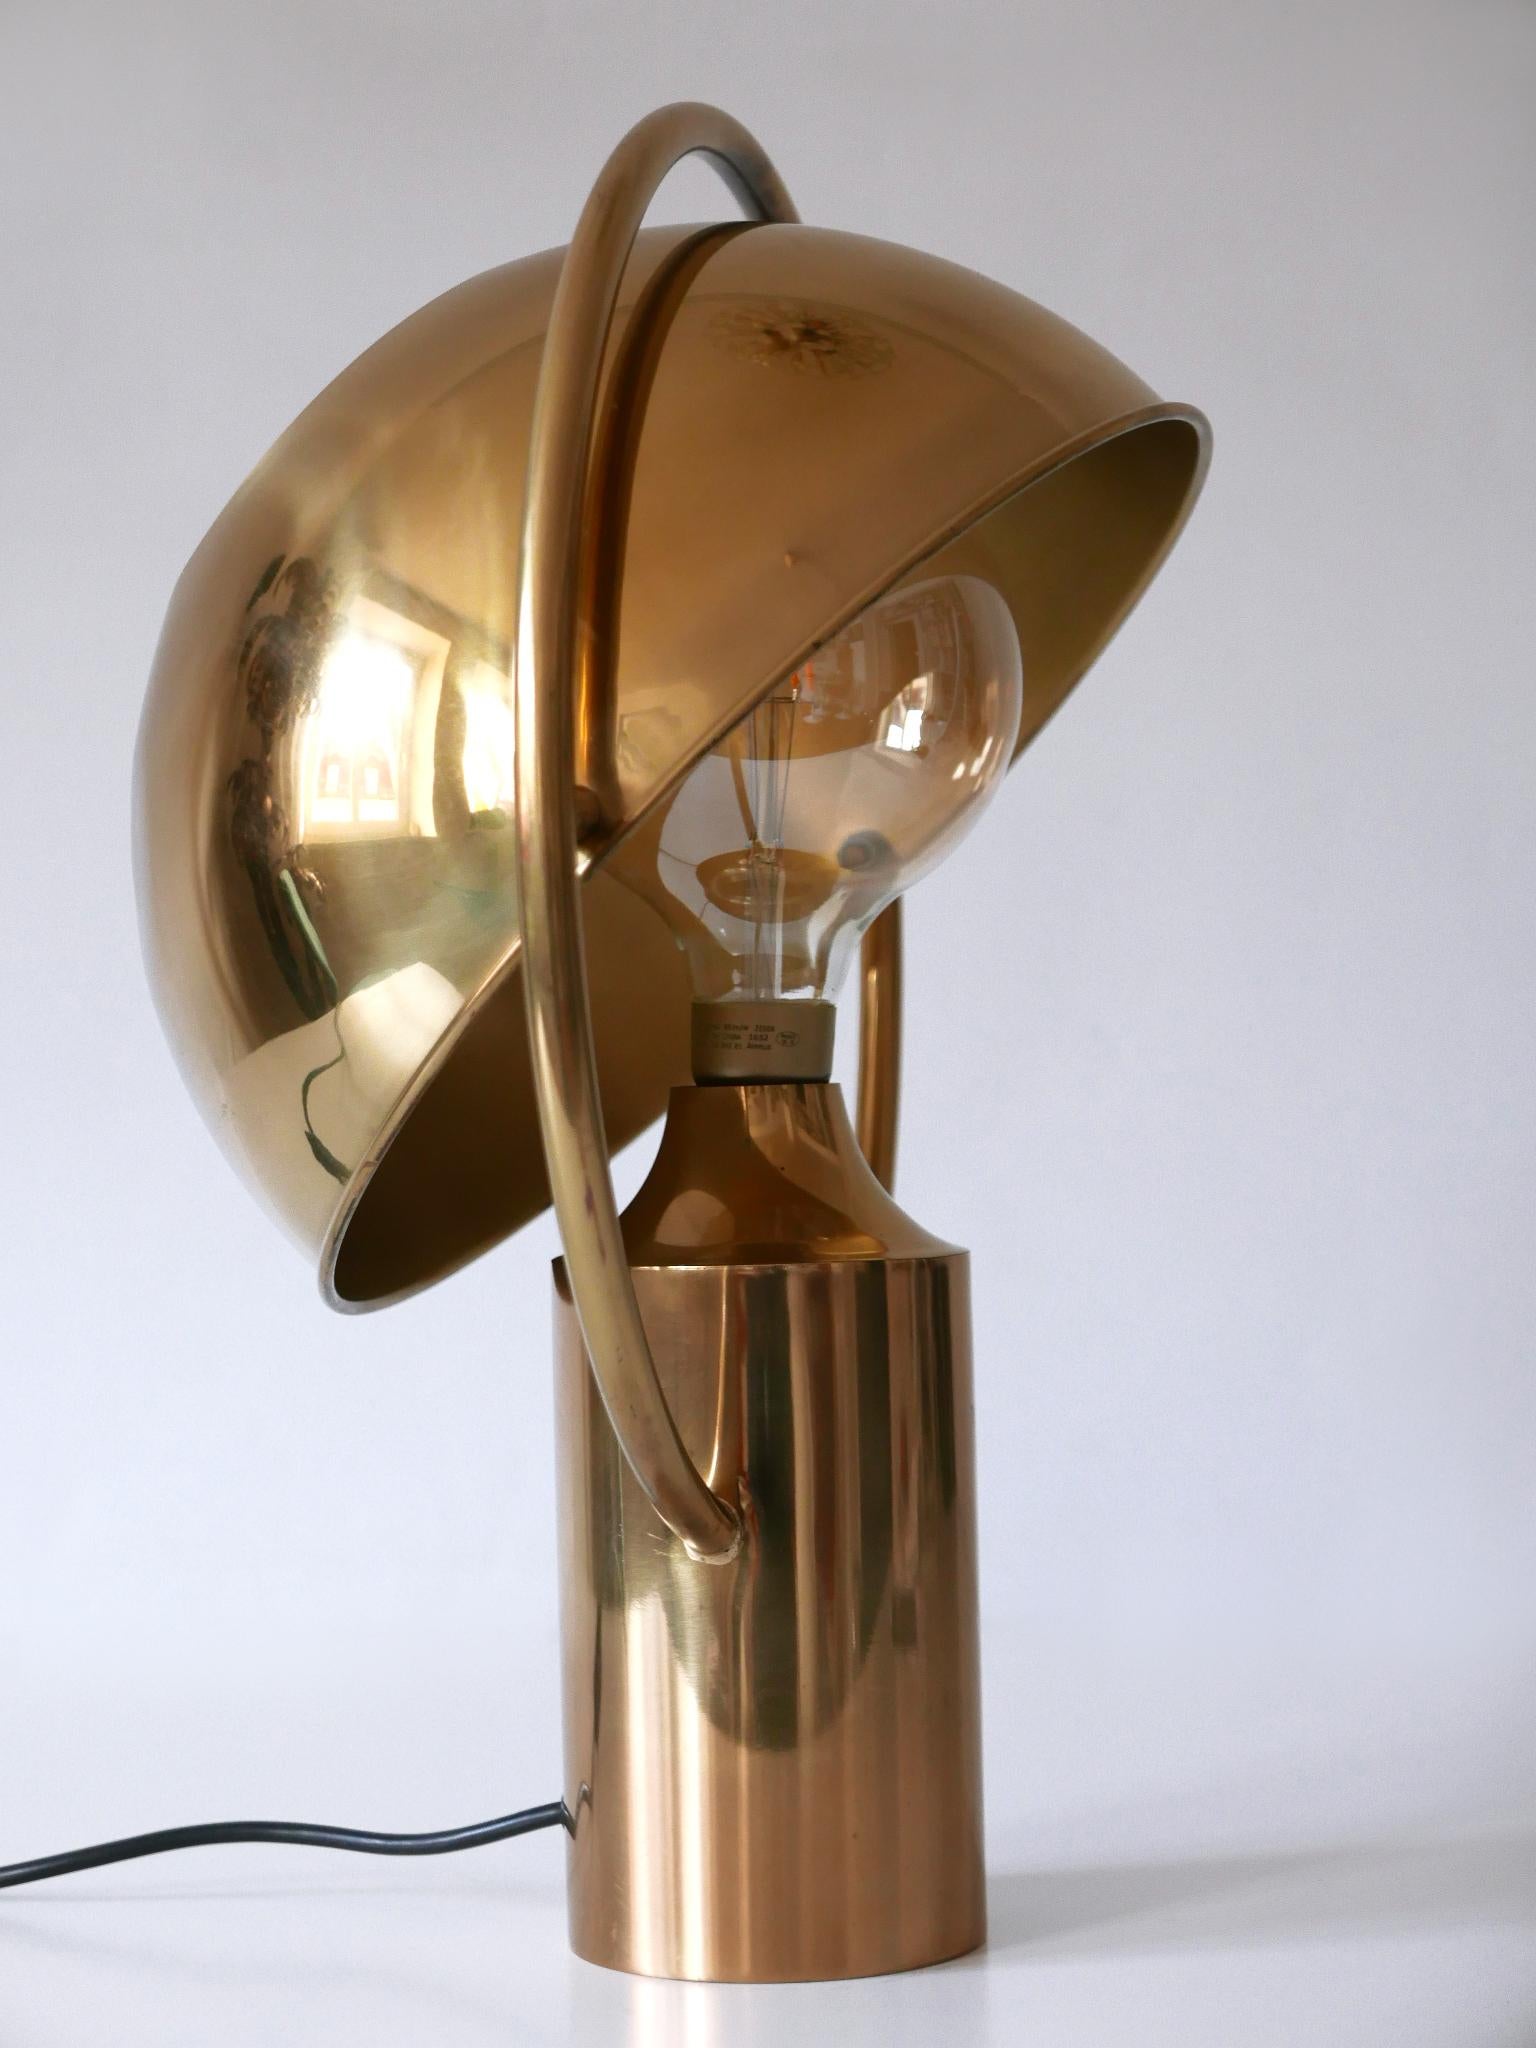 Extremely Rare Mid-Century Modern Table Lamp by Florian Schulz Germany 1970s For Sale 8